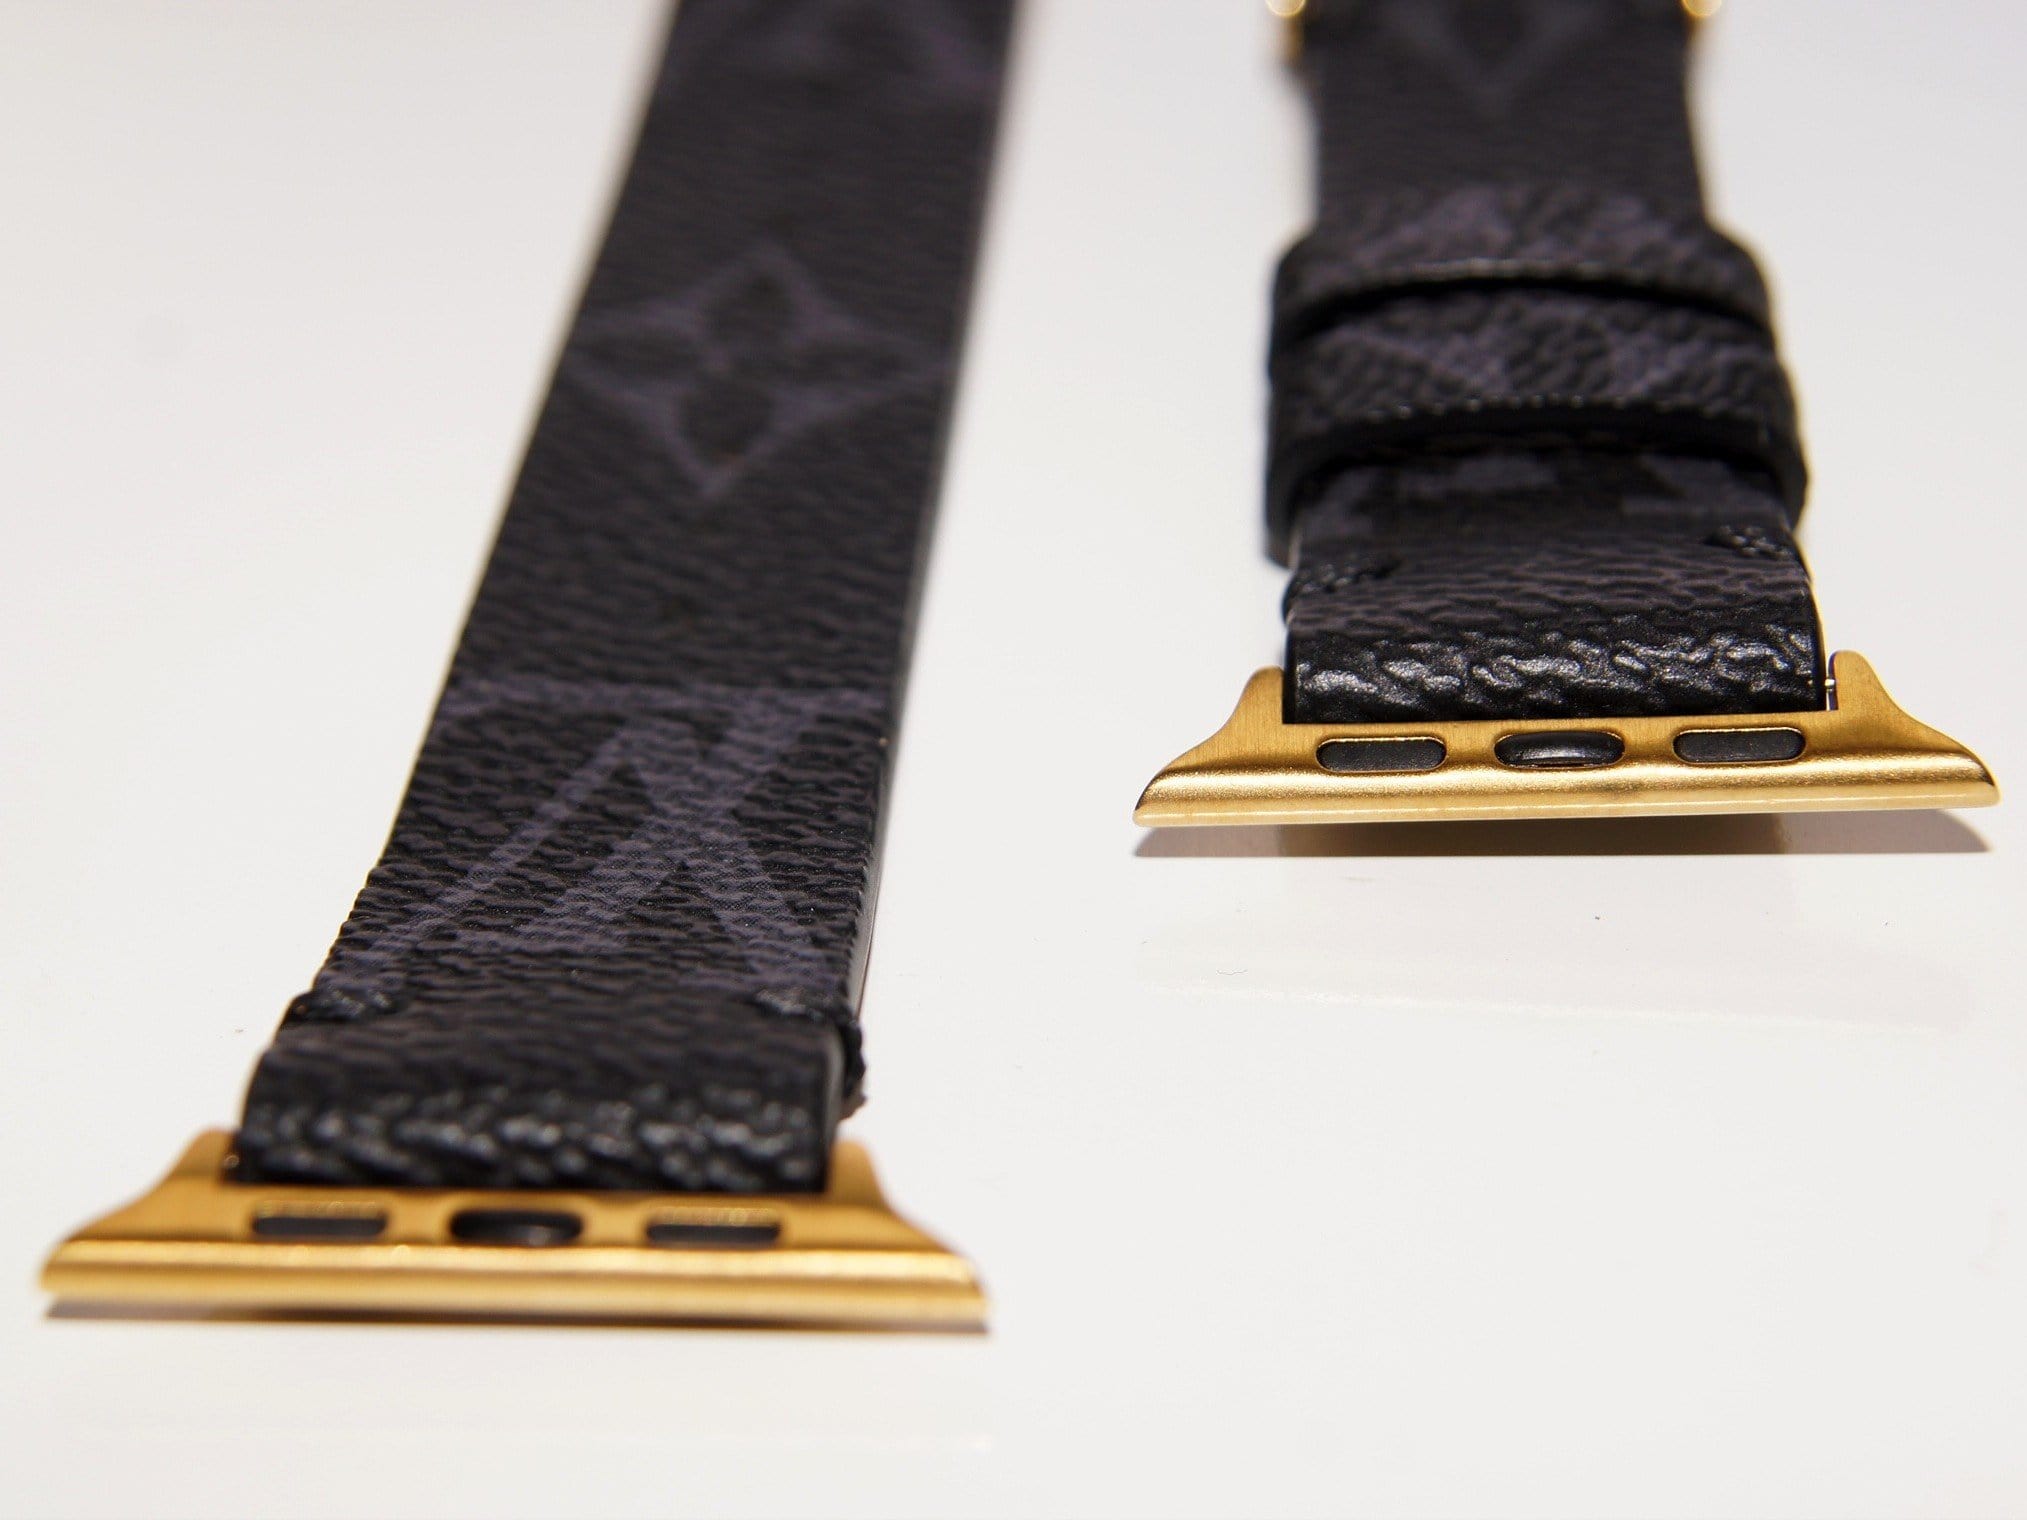 LV Watch Bands – 405 Mercantile